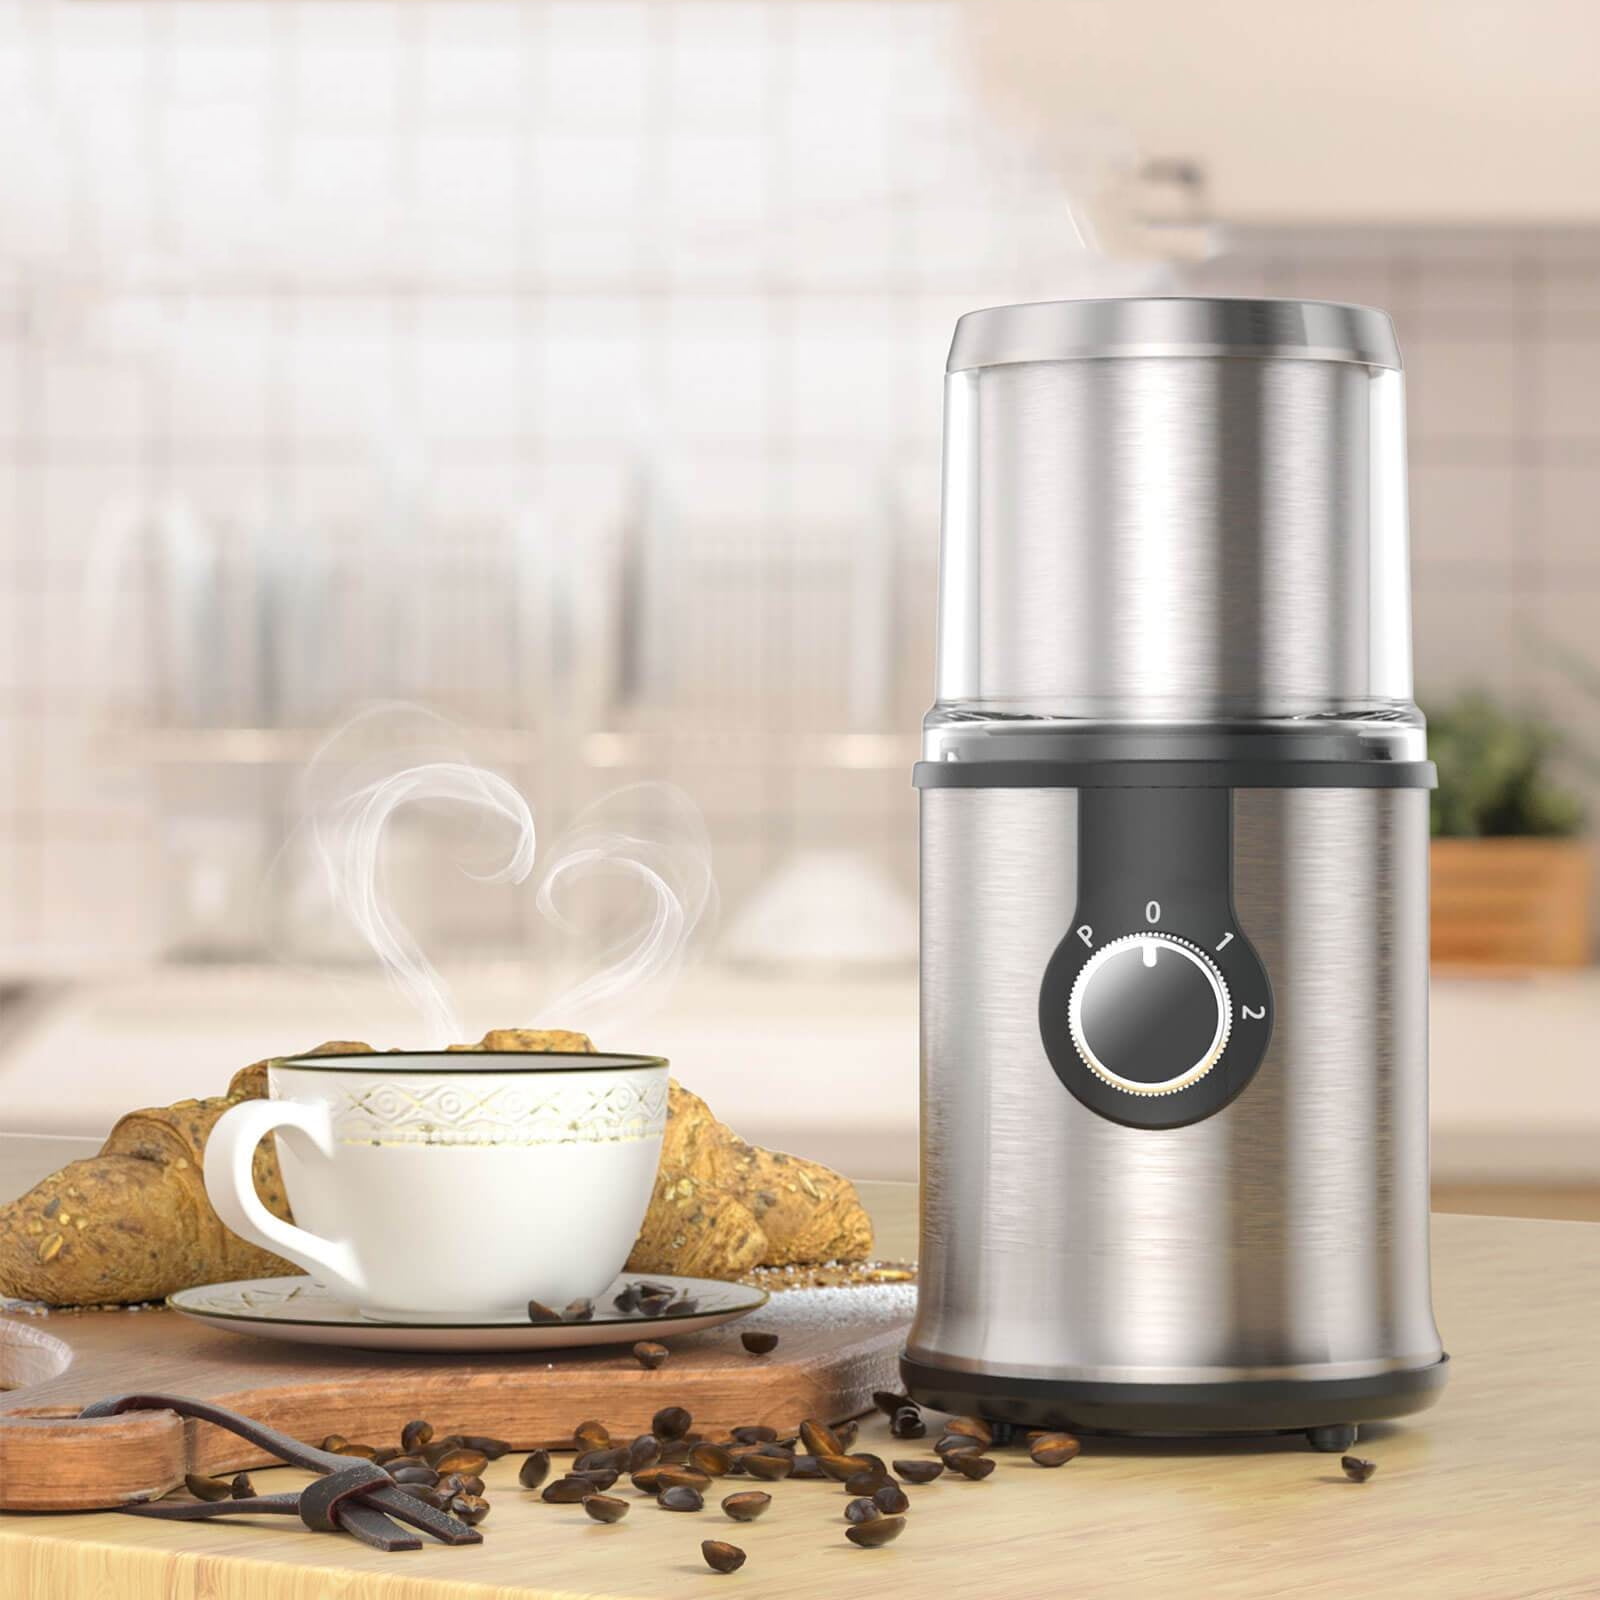 Electric Coffee Grinder - Matte Black - 3oz Capacity. Easy On/Off